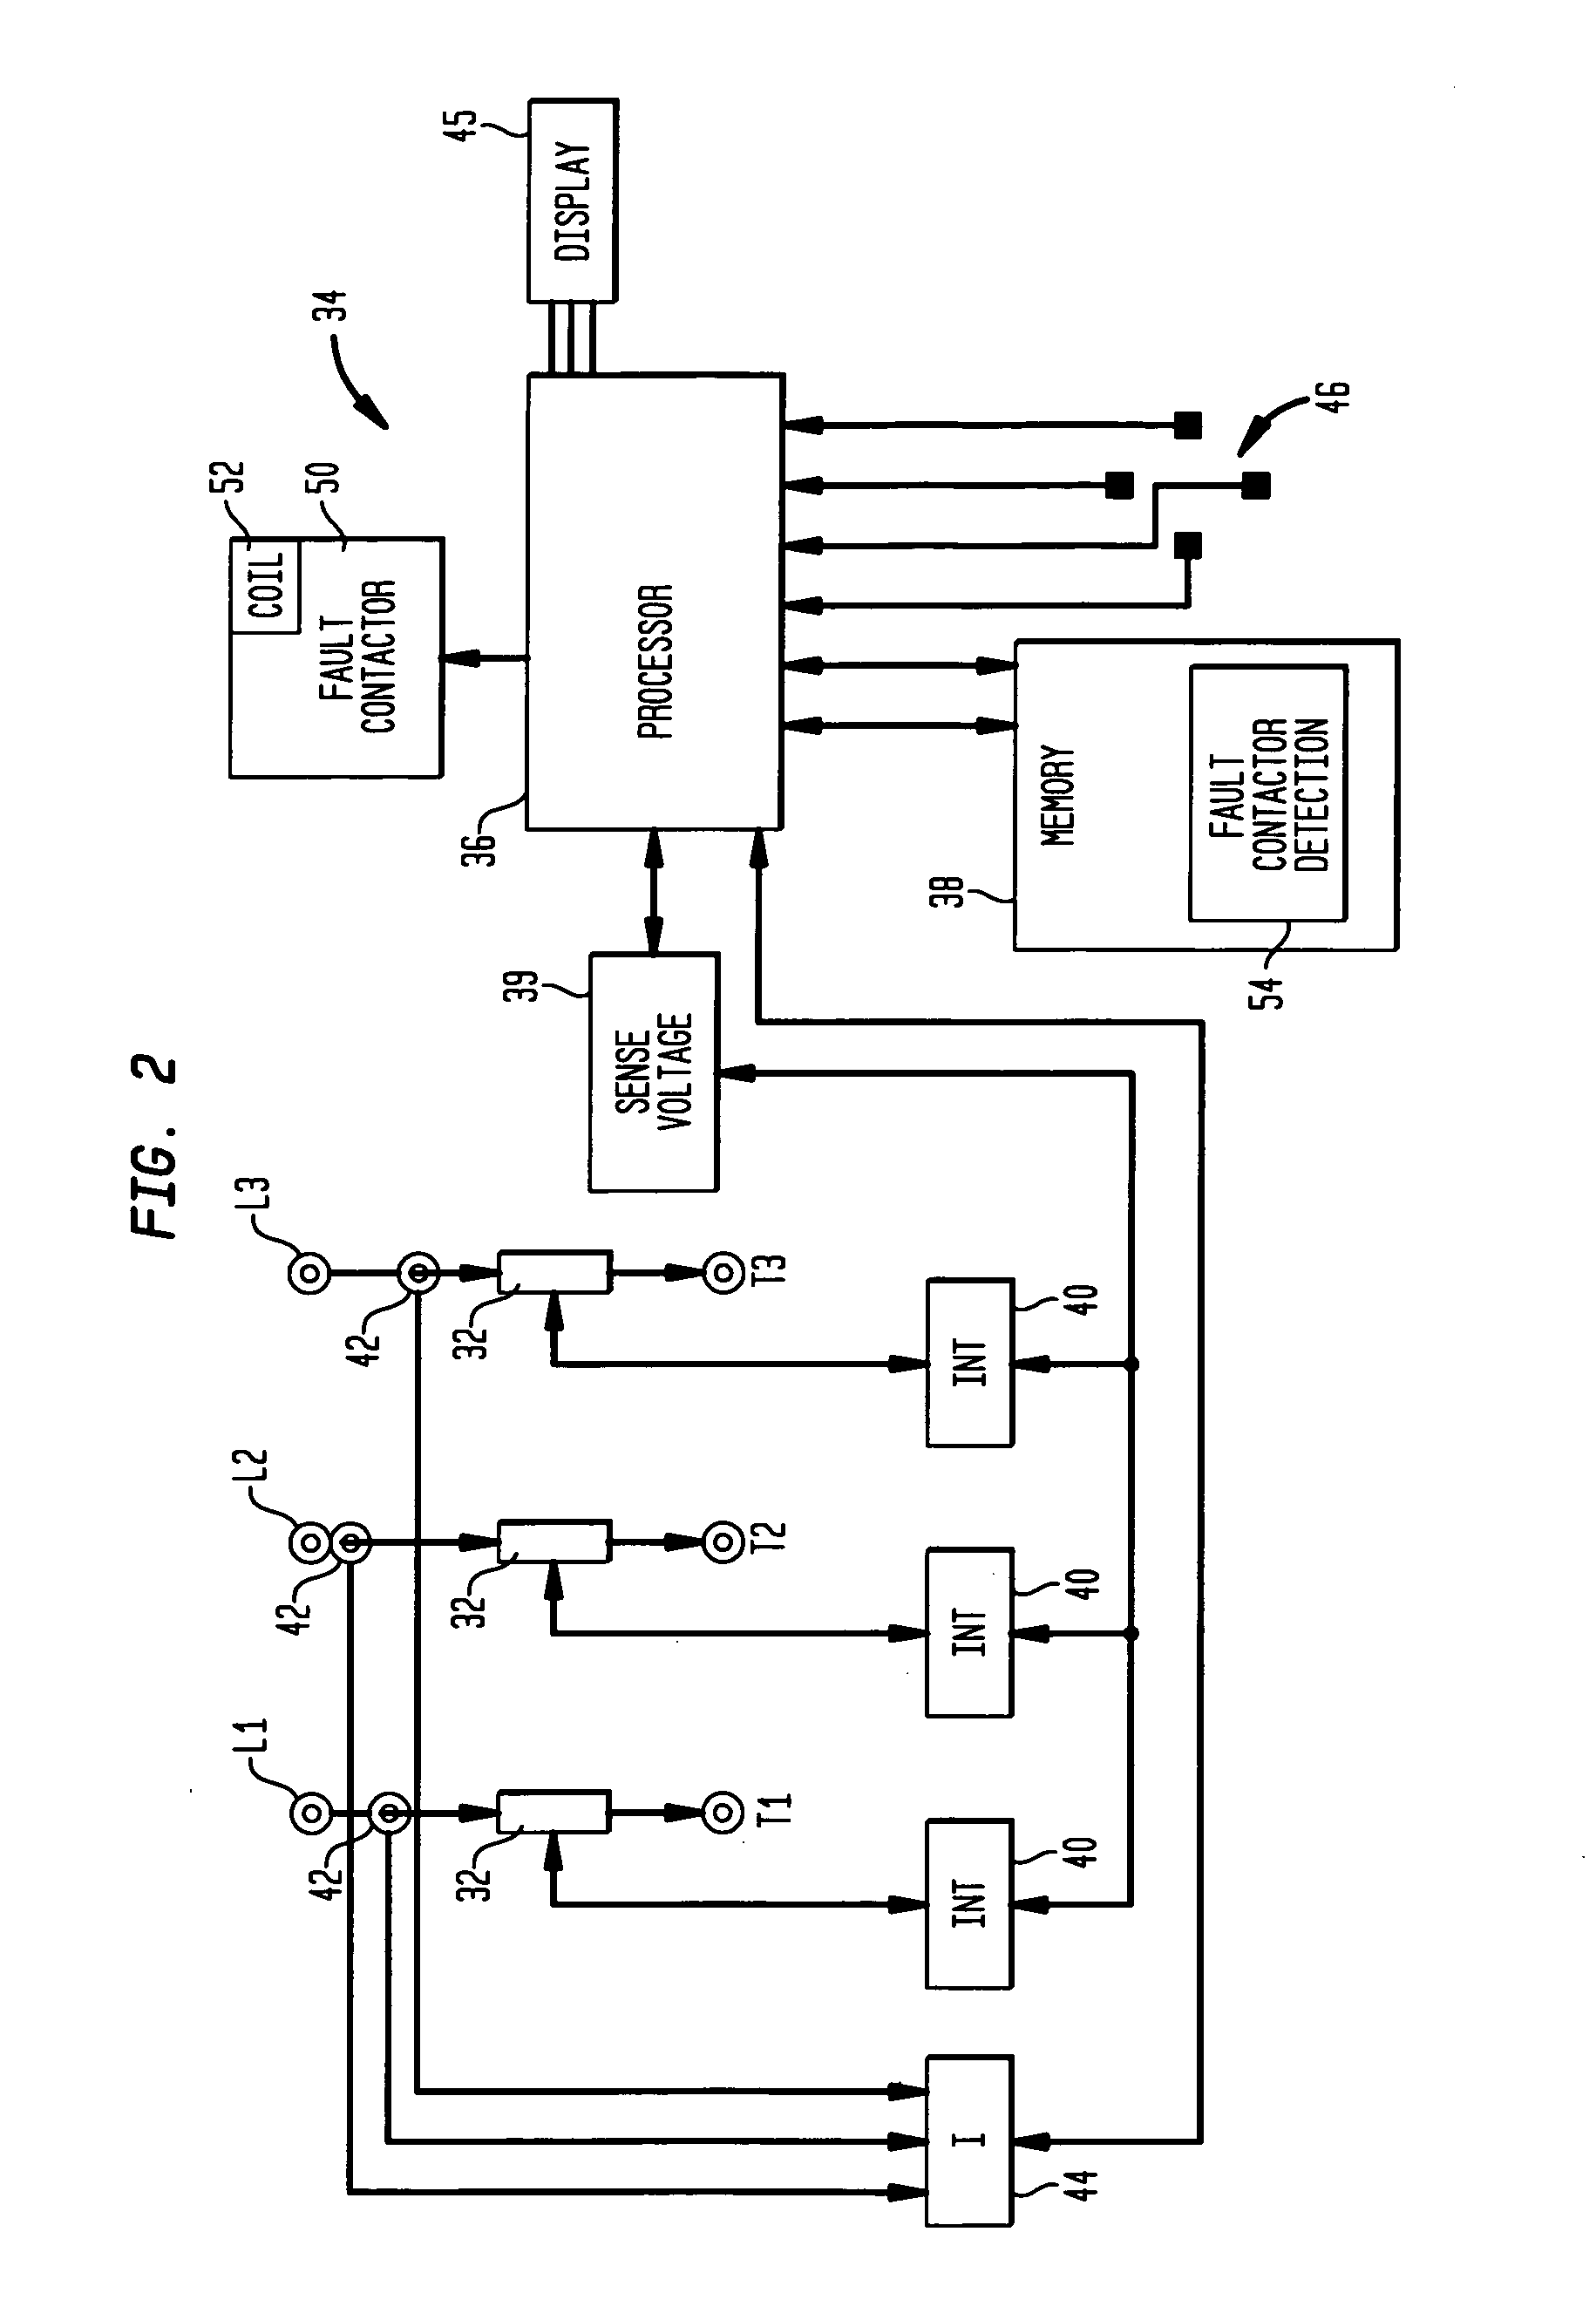 System and method for fault contactor detection